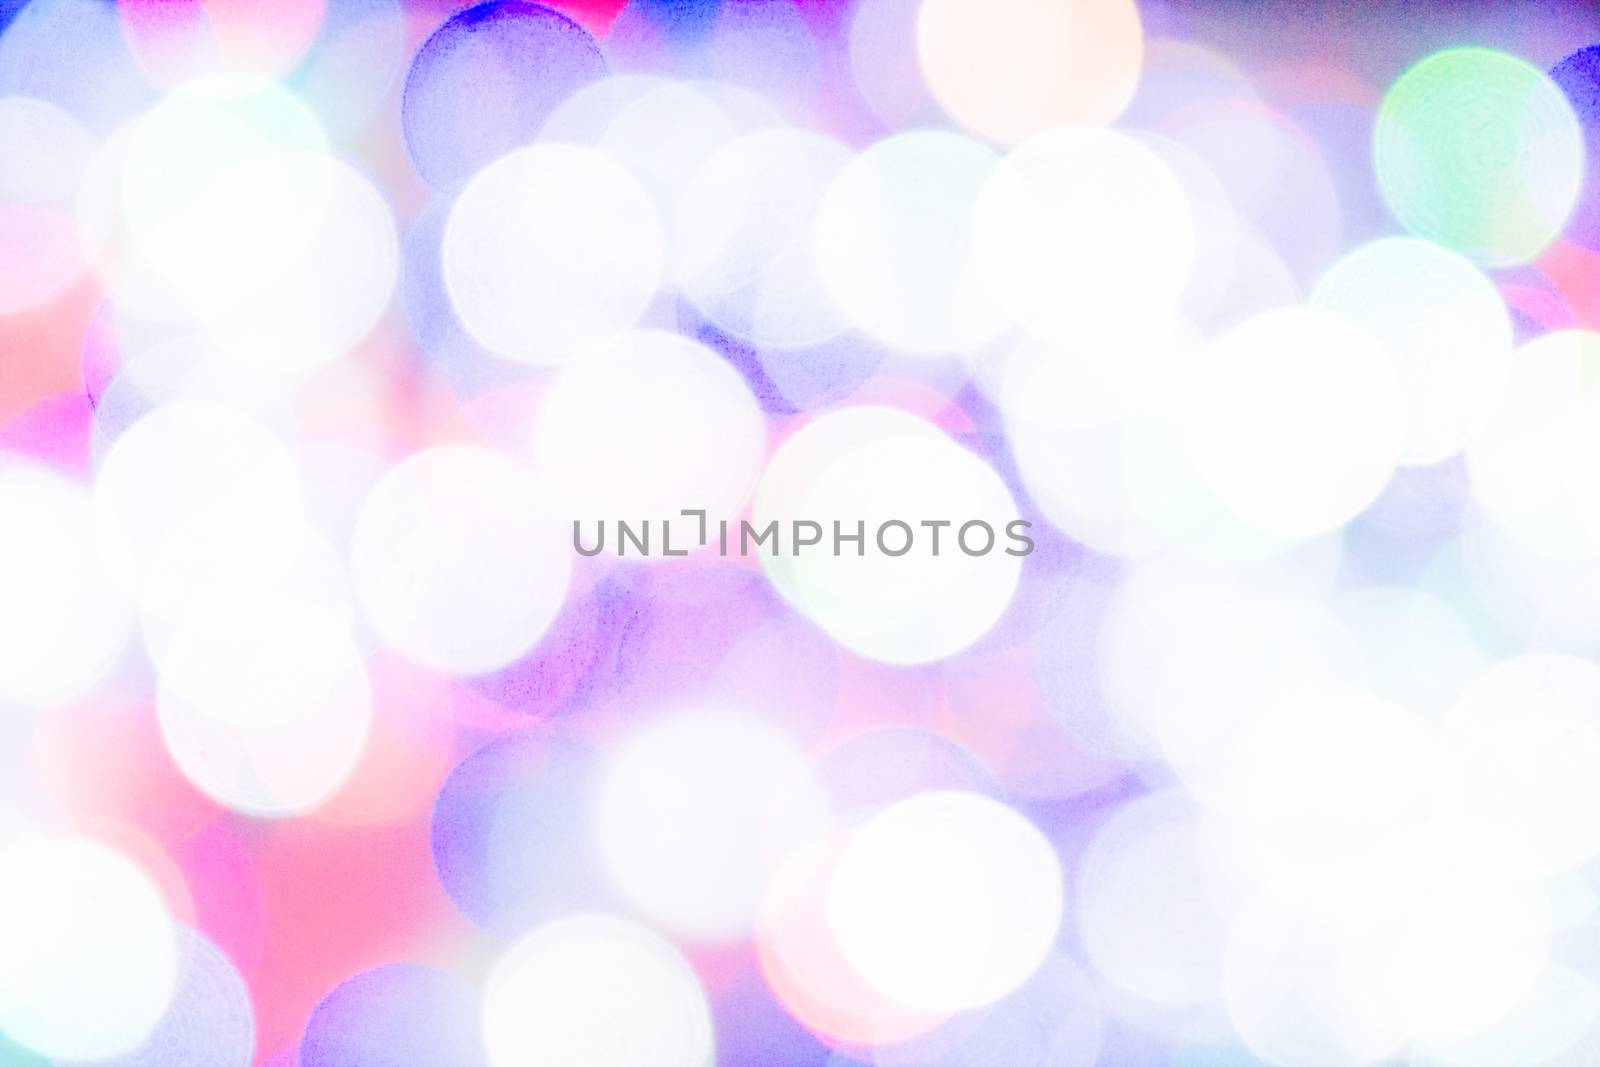 Bokeh with multi colors, Festive lights bokeh background, Bokeh light vintage background, Abstract colorful defocused, Soft focus